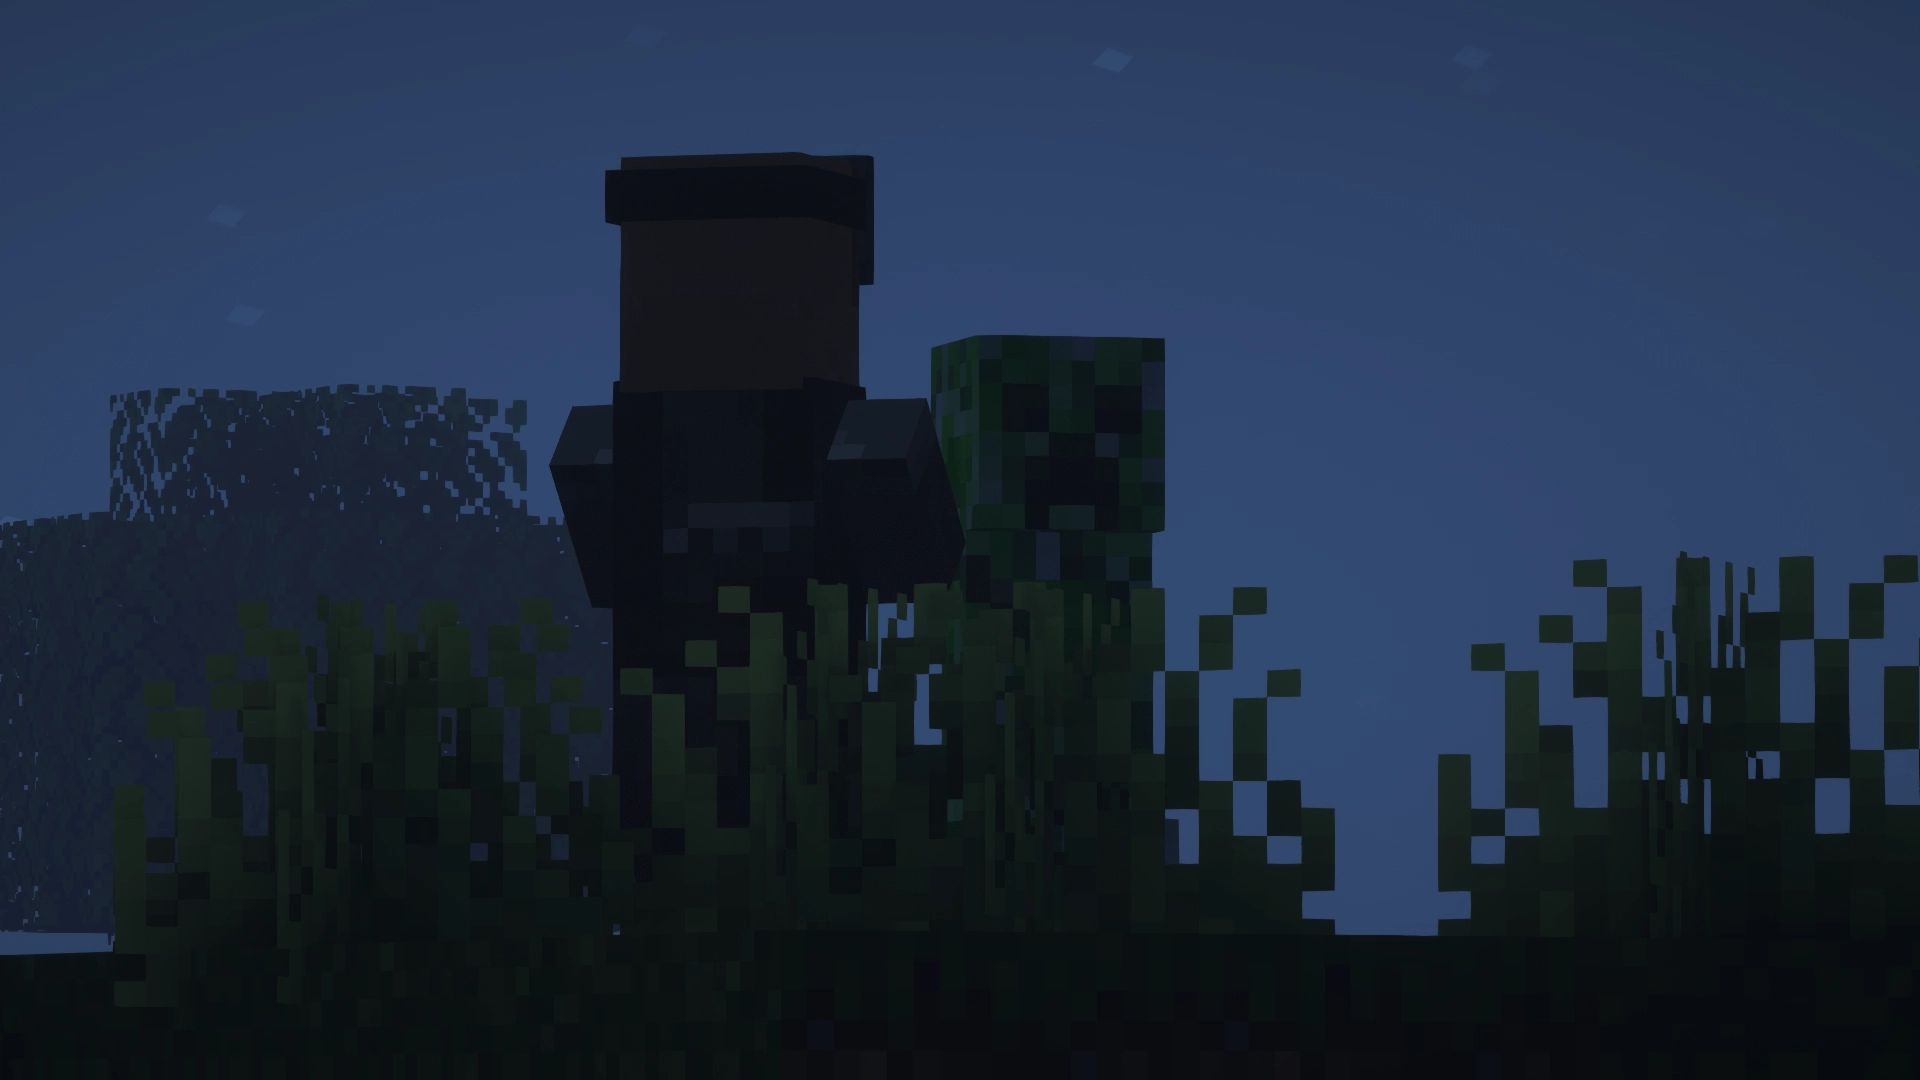 A blacksmith villager and a creeper standing right next to each other in the night. The villager is facing the creeper while it looks off into the distance, towards the right side of the camera.